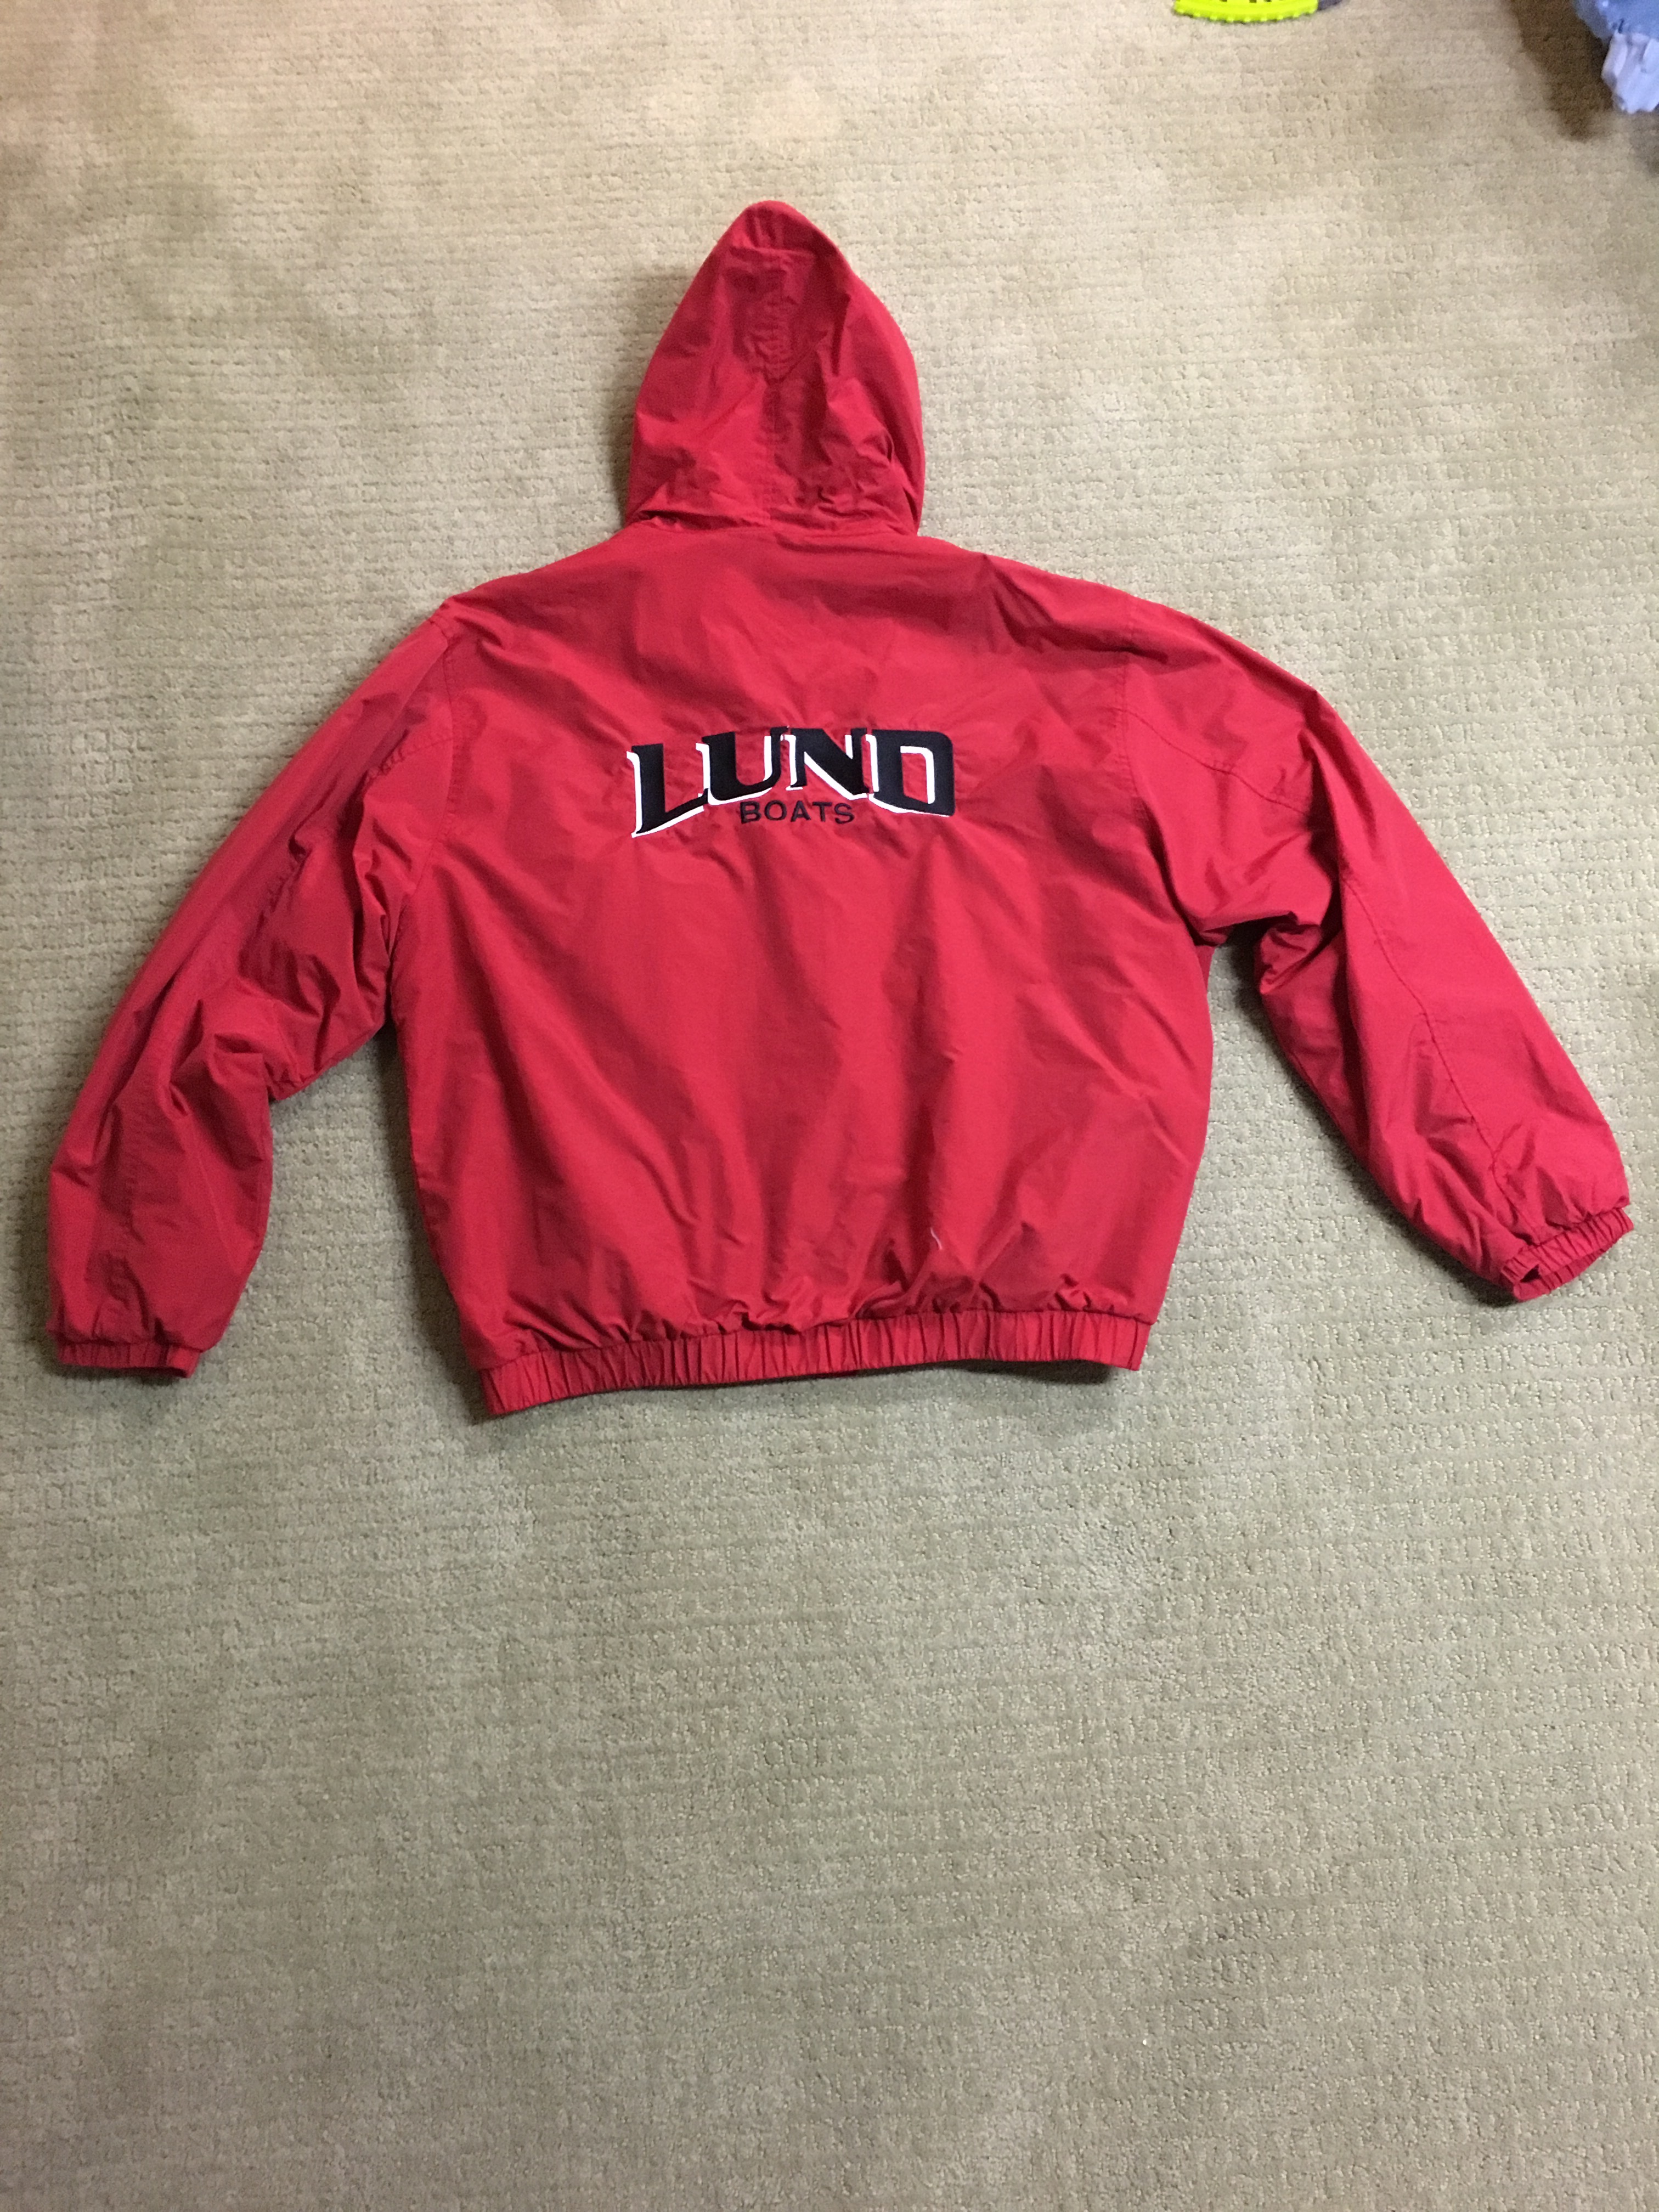 Lund lined jacket - Classified Ads - Classified Ads | In-Depth Outdoors